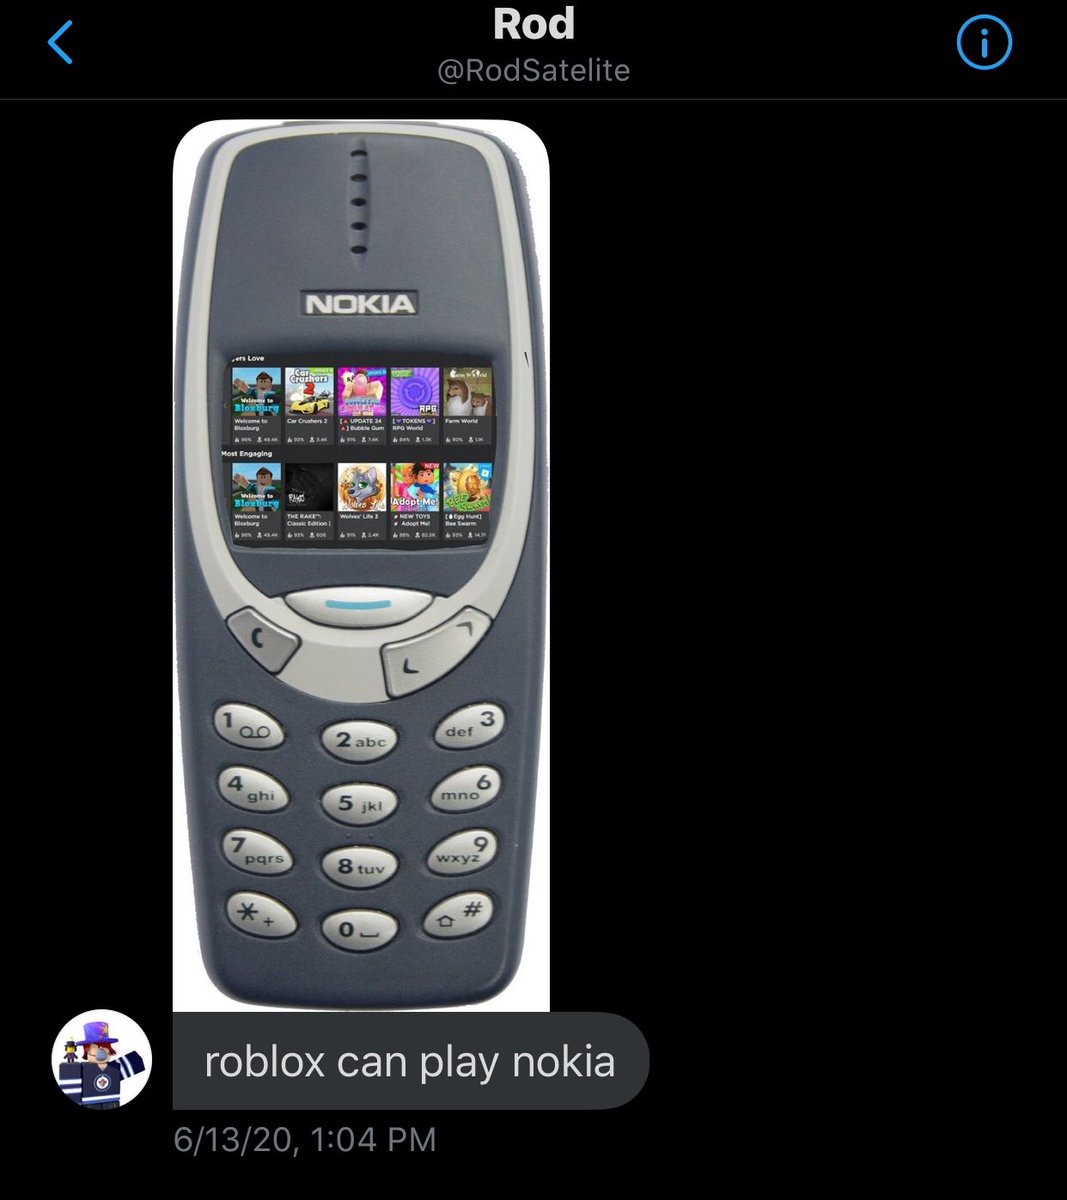 News Roblox On Twitter Roblox On The Nokia - rusty on twitter at roblox at serablox is there going to be